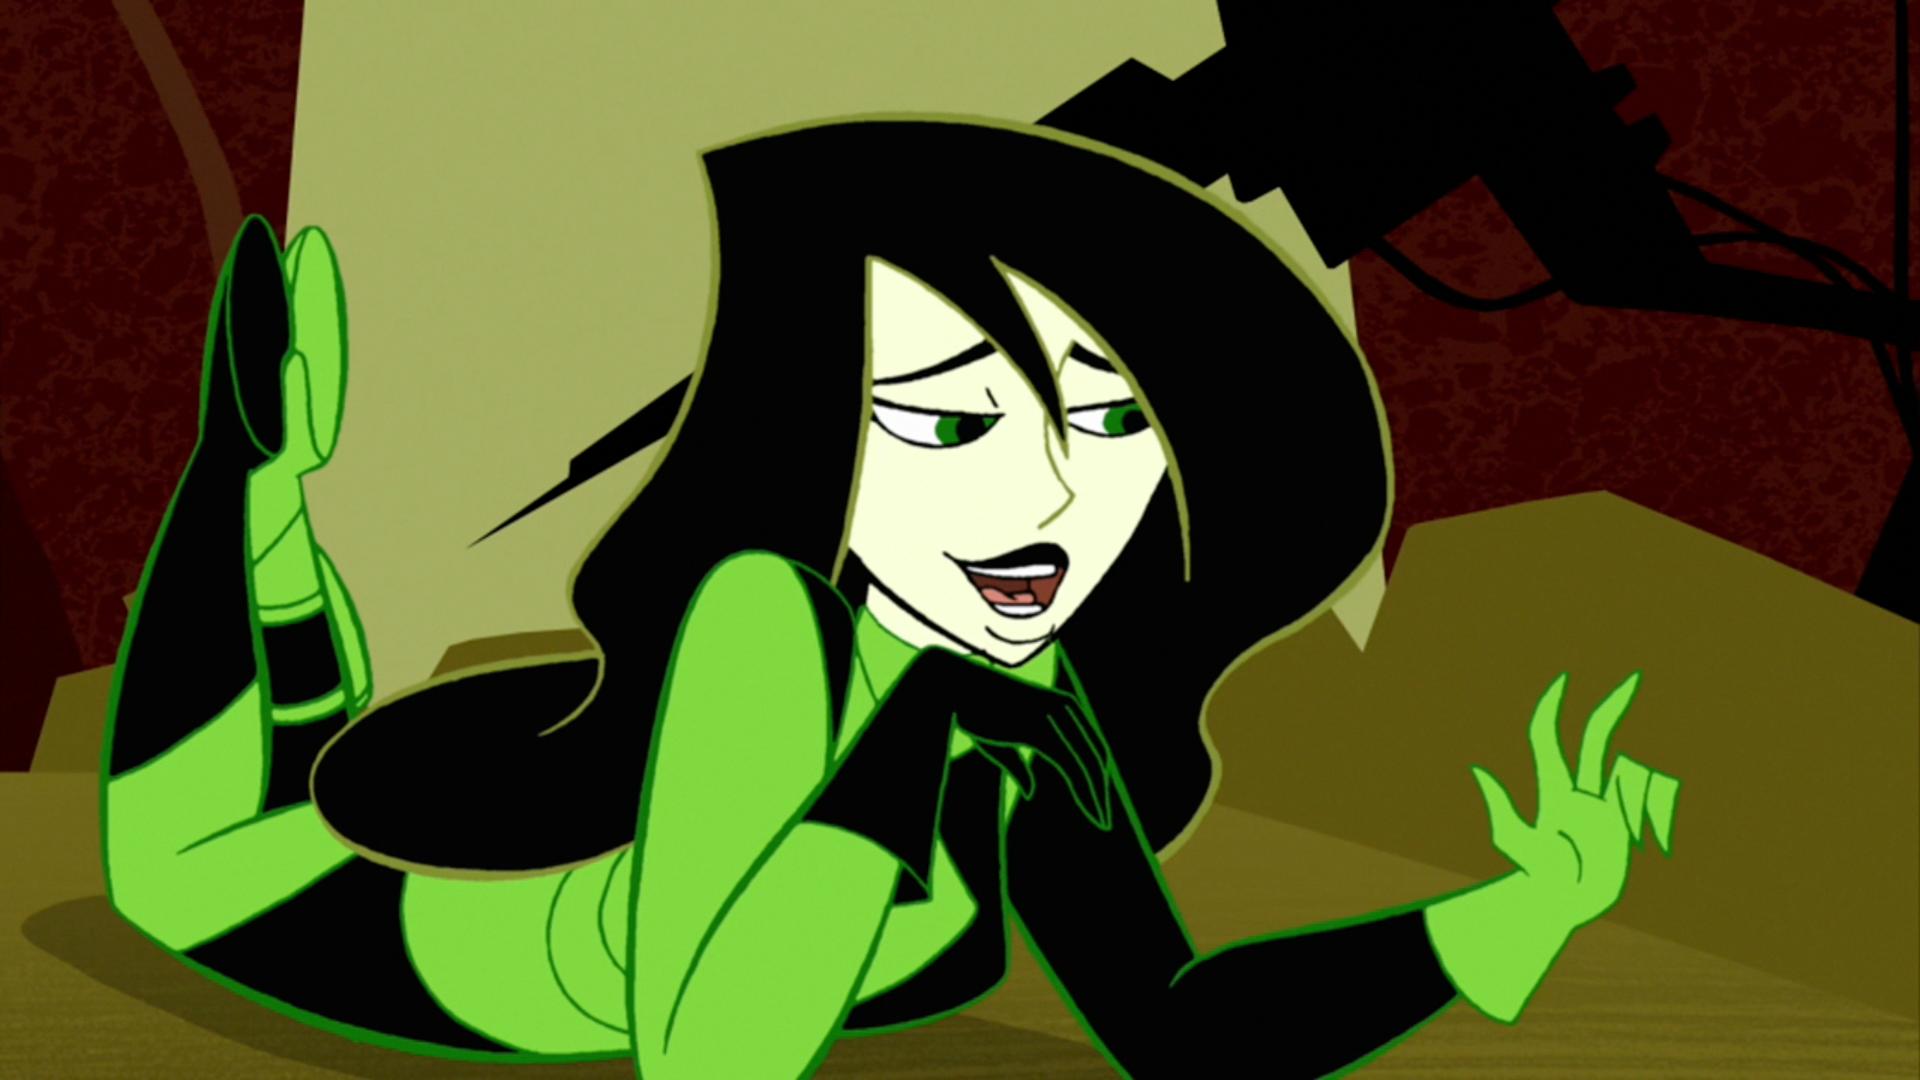 1-100. Kim and Shego begin to act strange after a device attaches to their ...